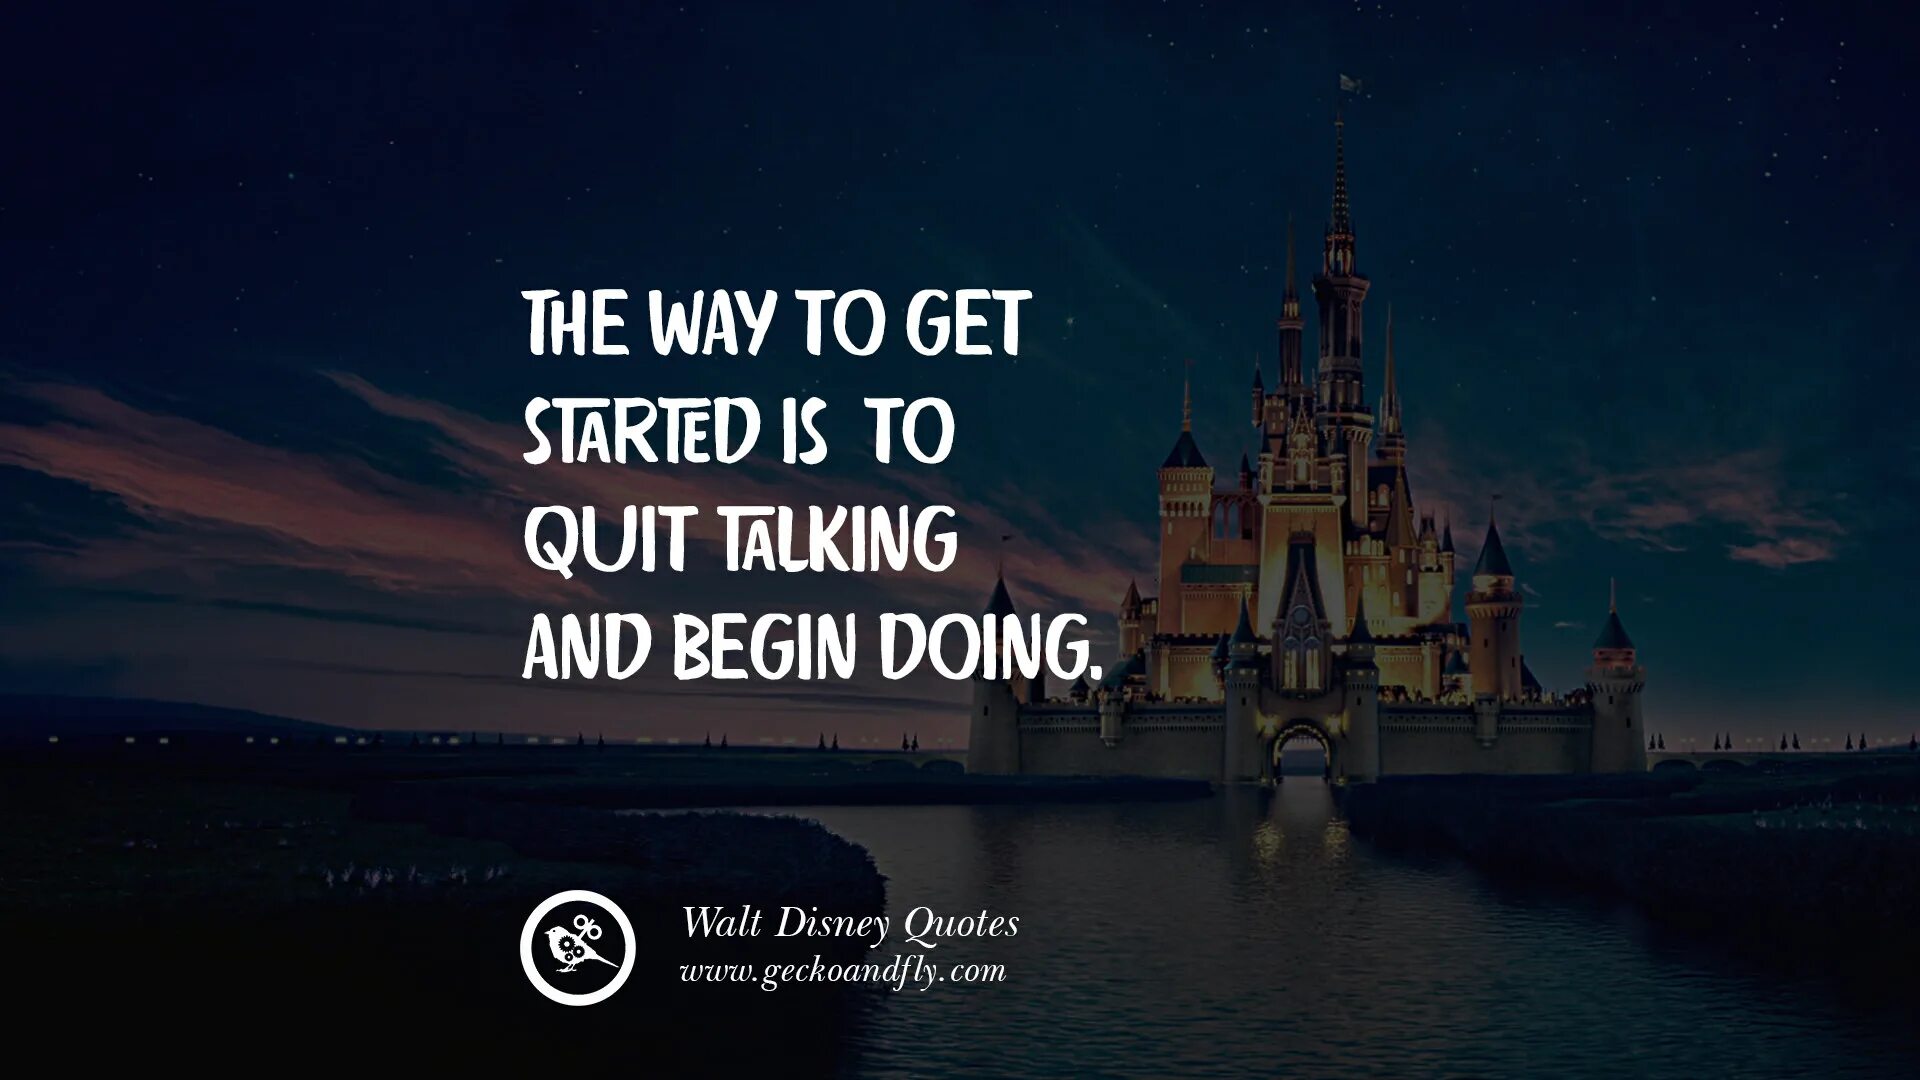 Life gets in the way. Walt Disney quotes. The way to get started is to quit talking and begin doing. Keep moving forward Дисней. Дисней Уолт мотивация.